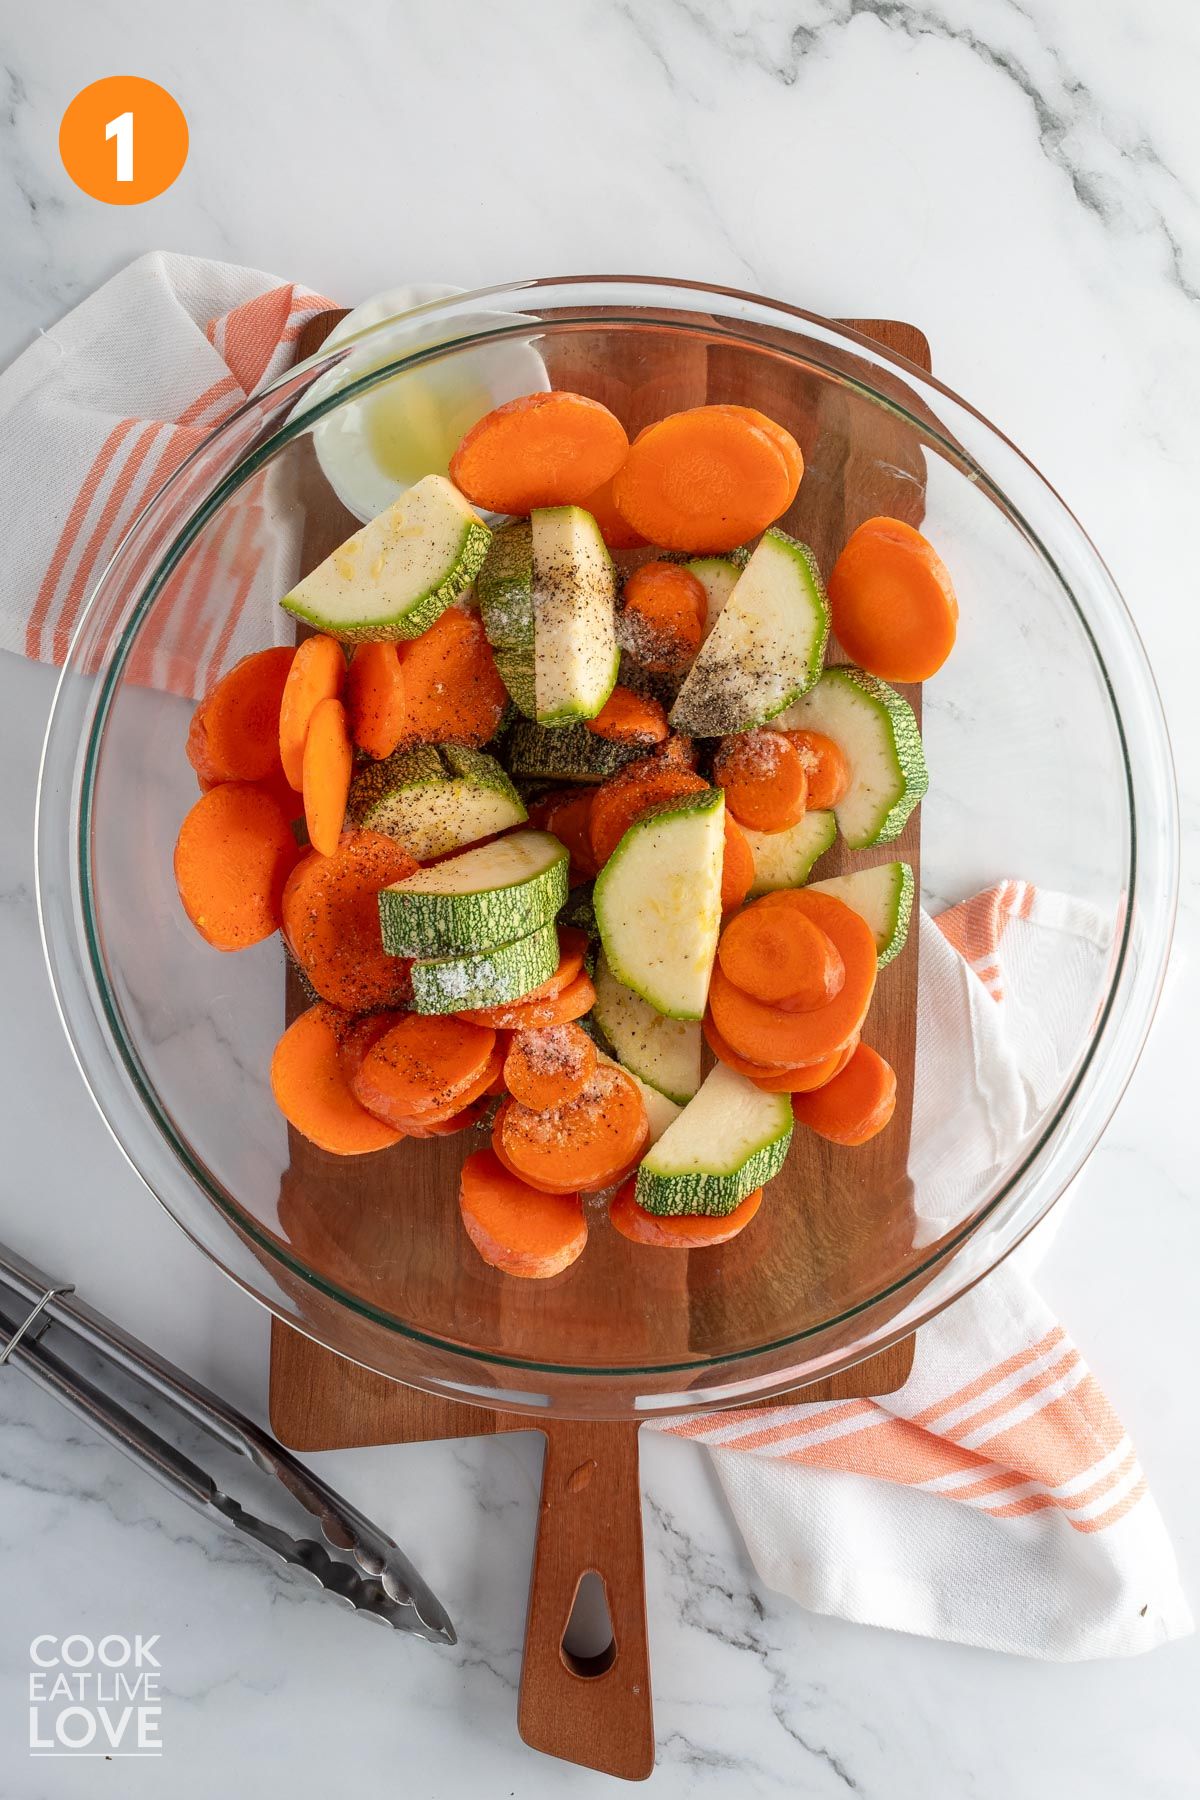 Zucchini and carrots in a large bowl.